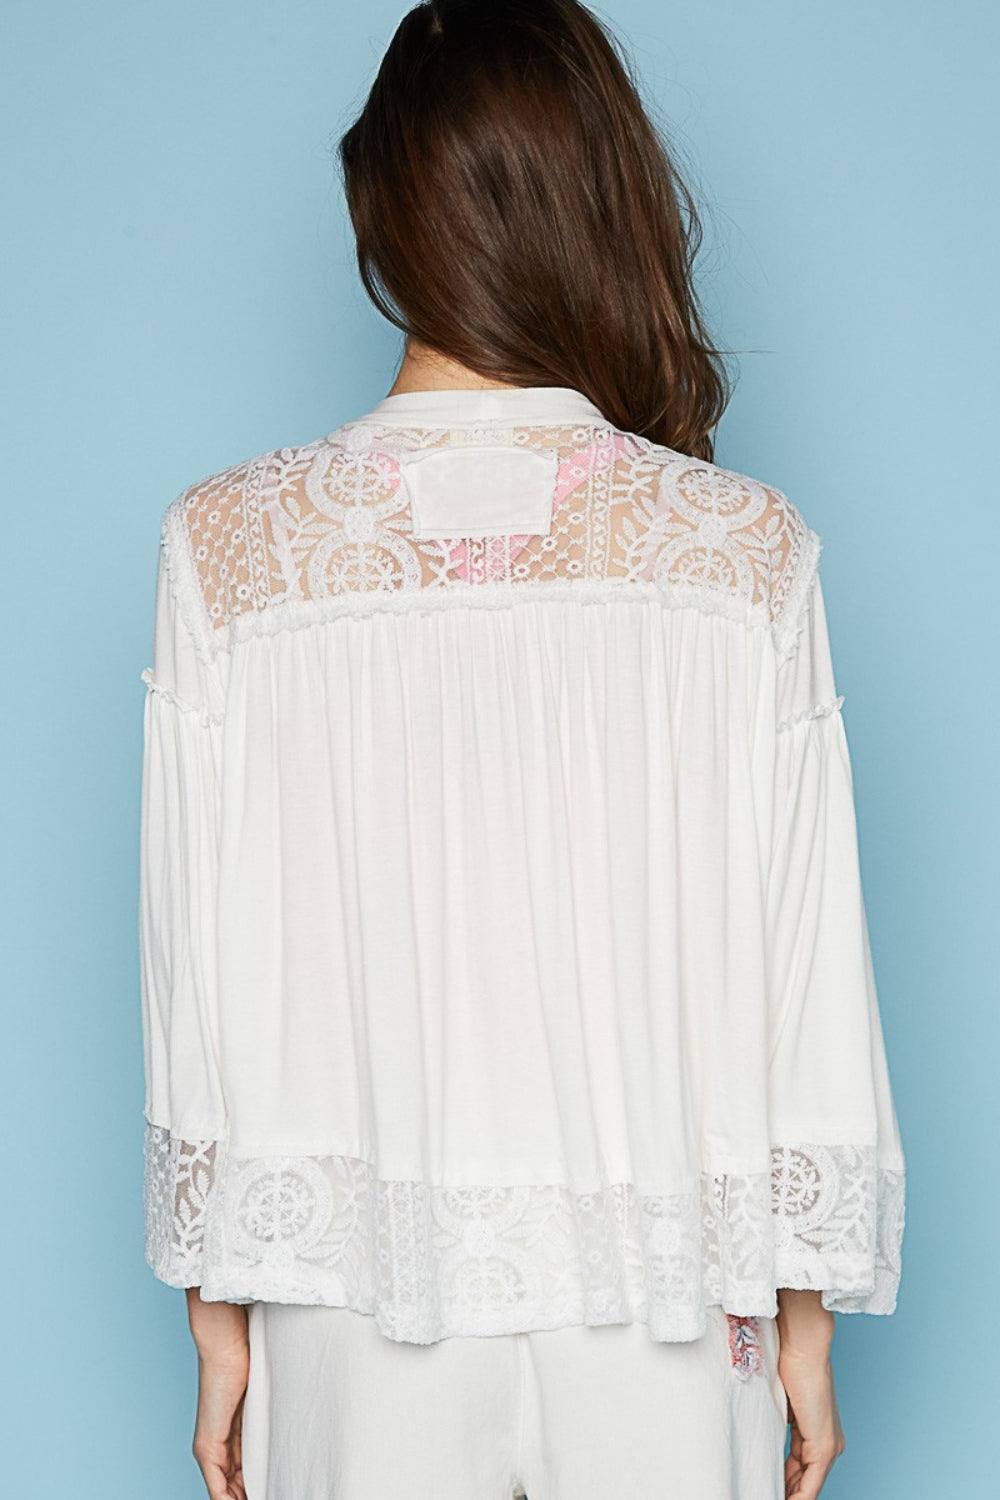 ONLINE ONLY! POL Open Front Lace Detail Cardigan